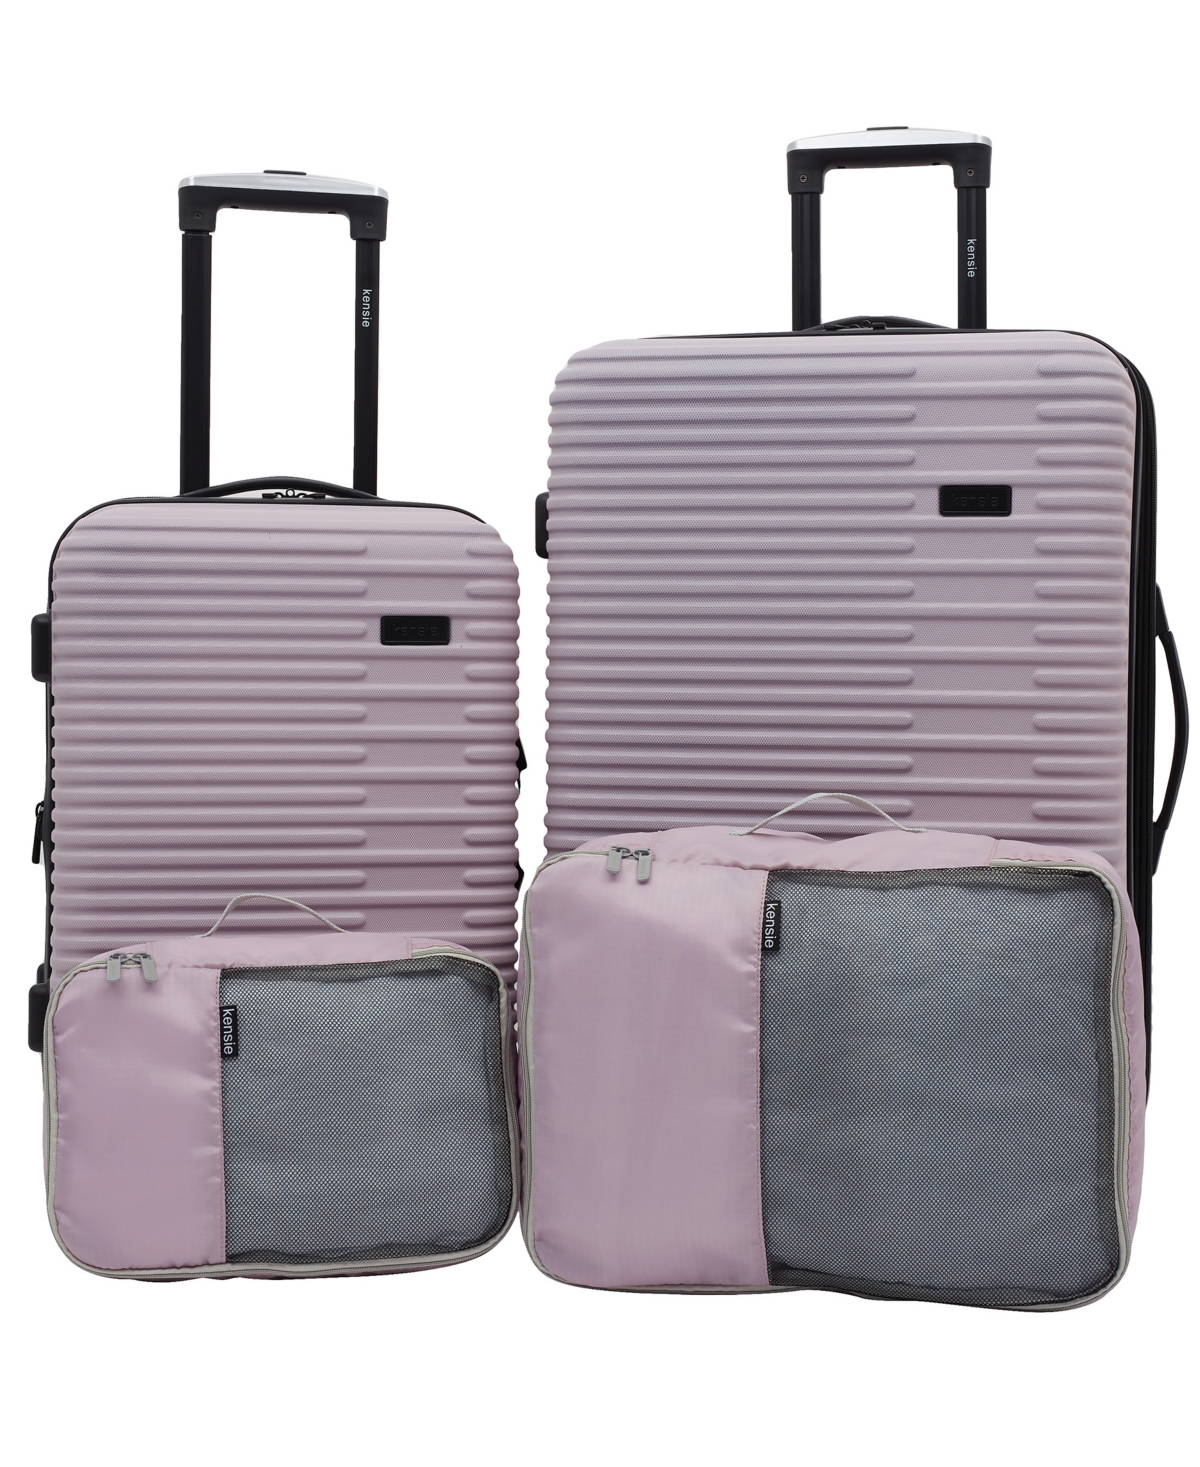 Kensie Hillsboro Expandable Rolling Hardside Collection Set, 4 Piece In Burnished Lilac